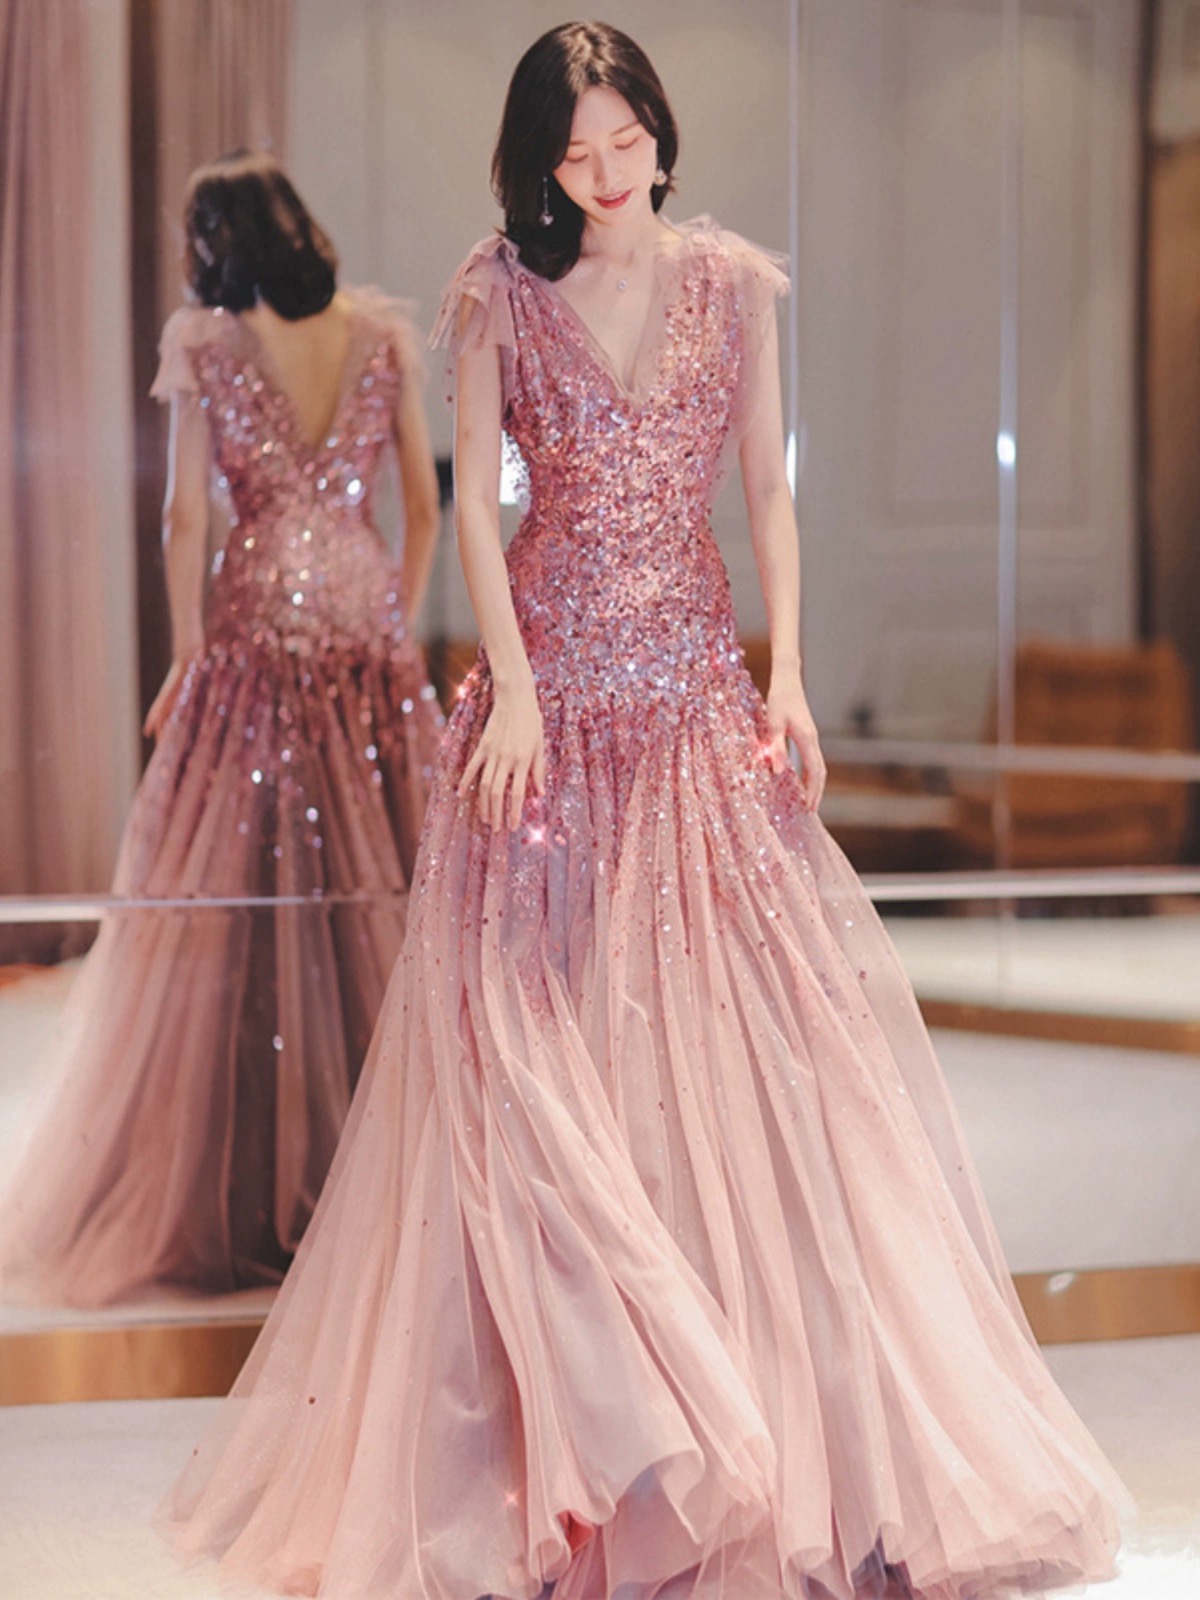 Pink Mermaid Tulle Long Evening Dress With Lace, V-neckline Floor Length Prom Dress